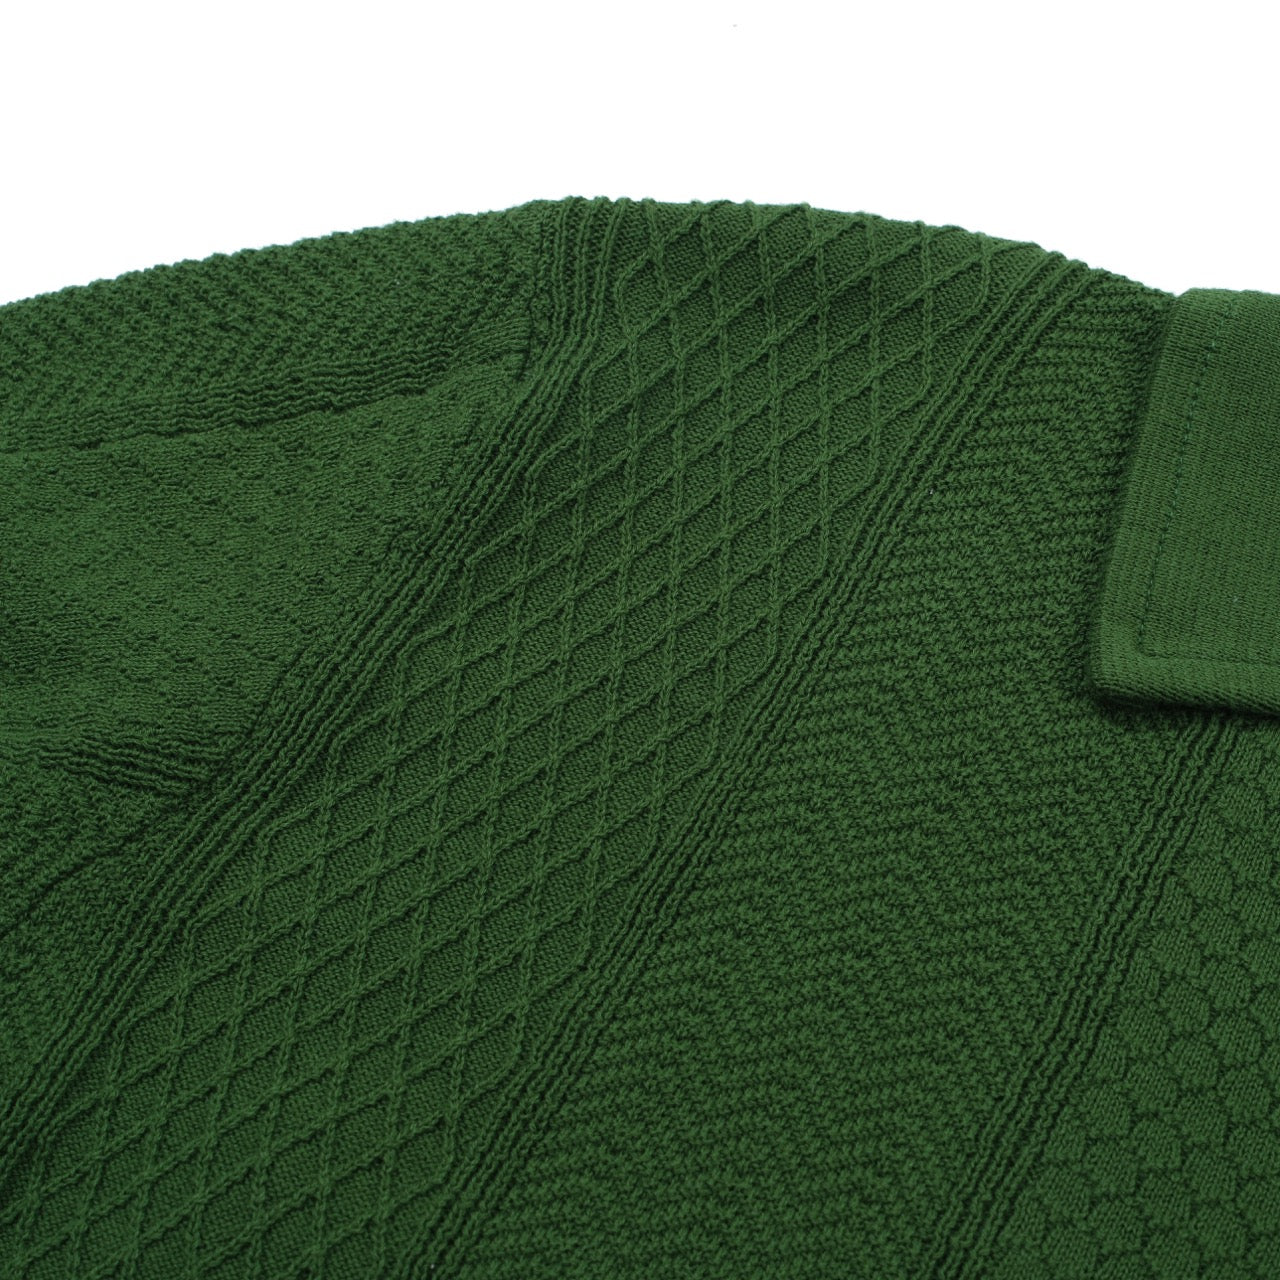 OXKNIT Men Vintage Clothing 1960s Mod Style Casual Green Knit Retro Polo